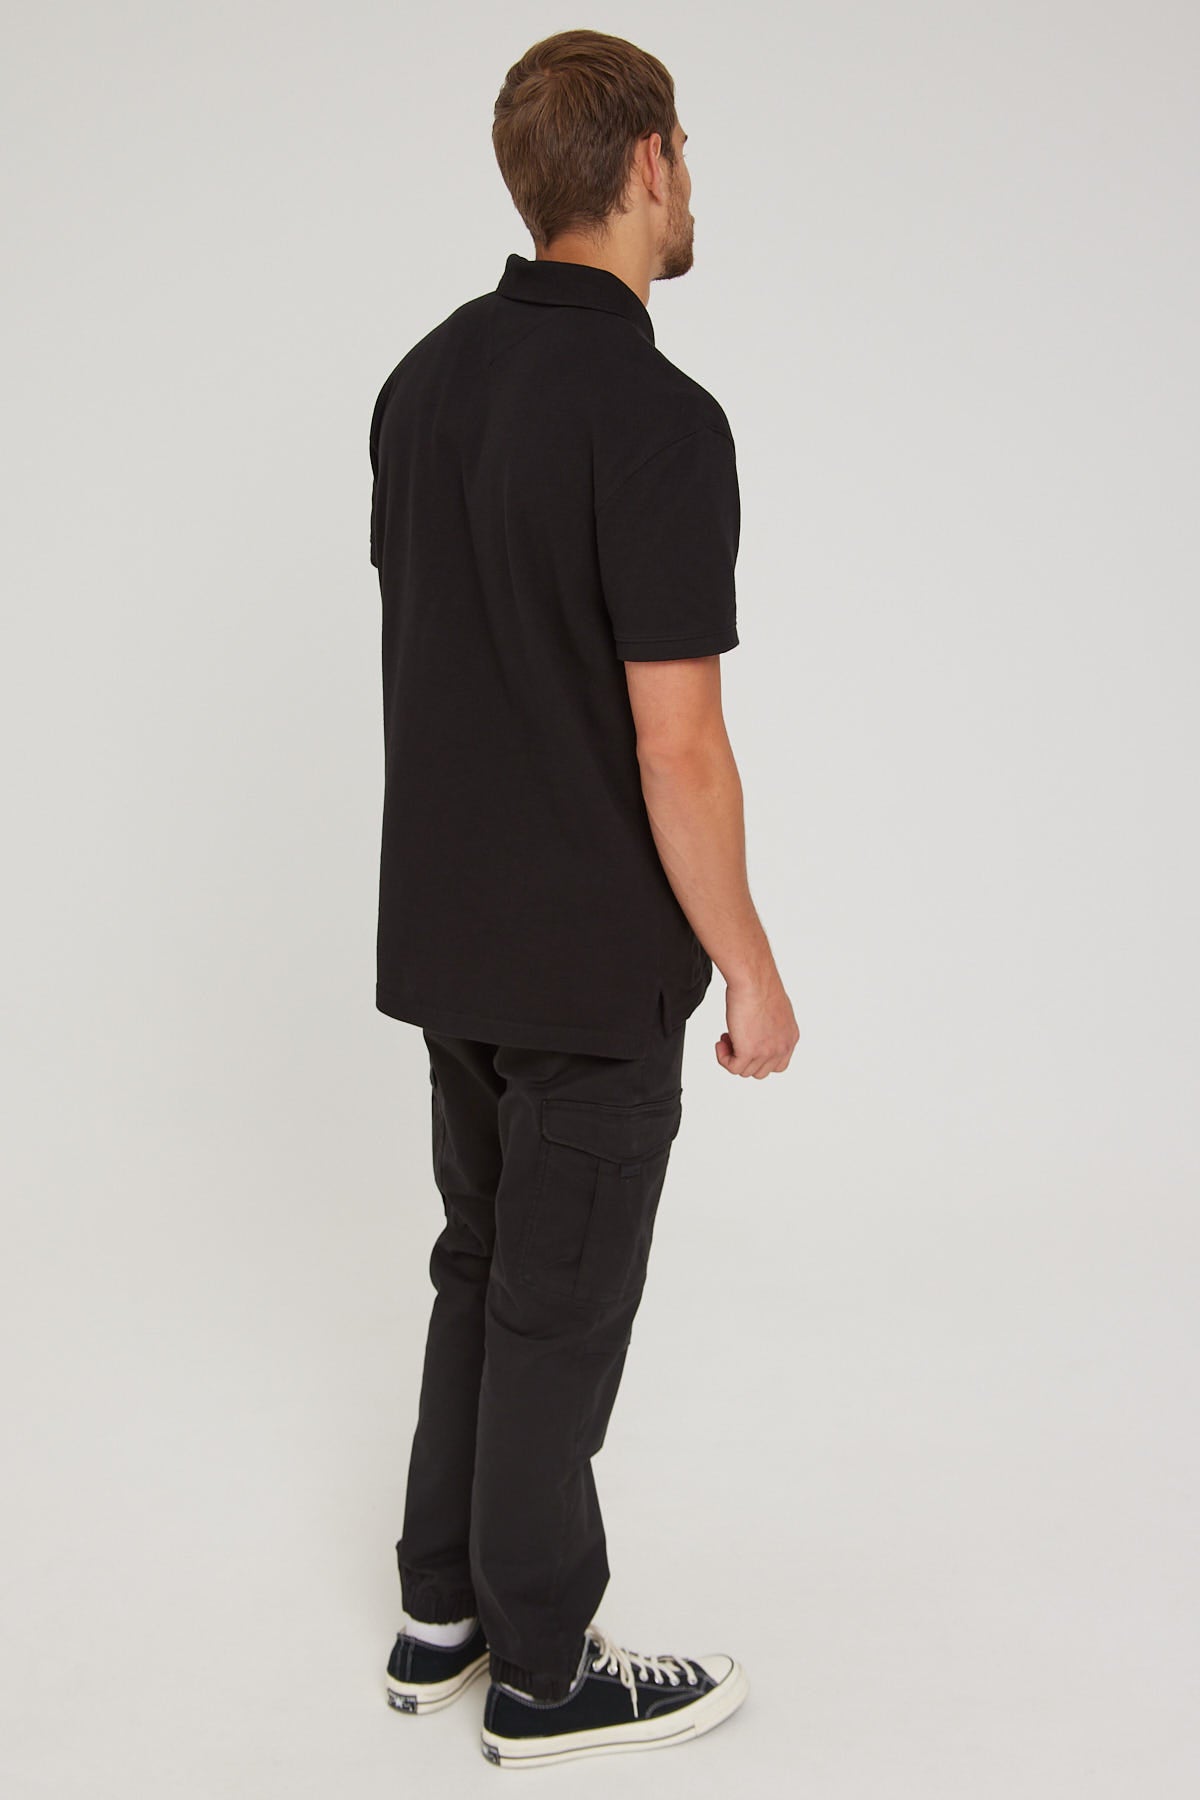 Tommy Jeans TJM Ethan Washed Twill Cargo Pant Black